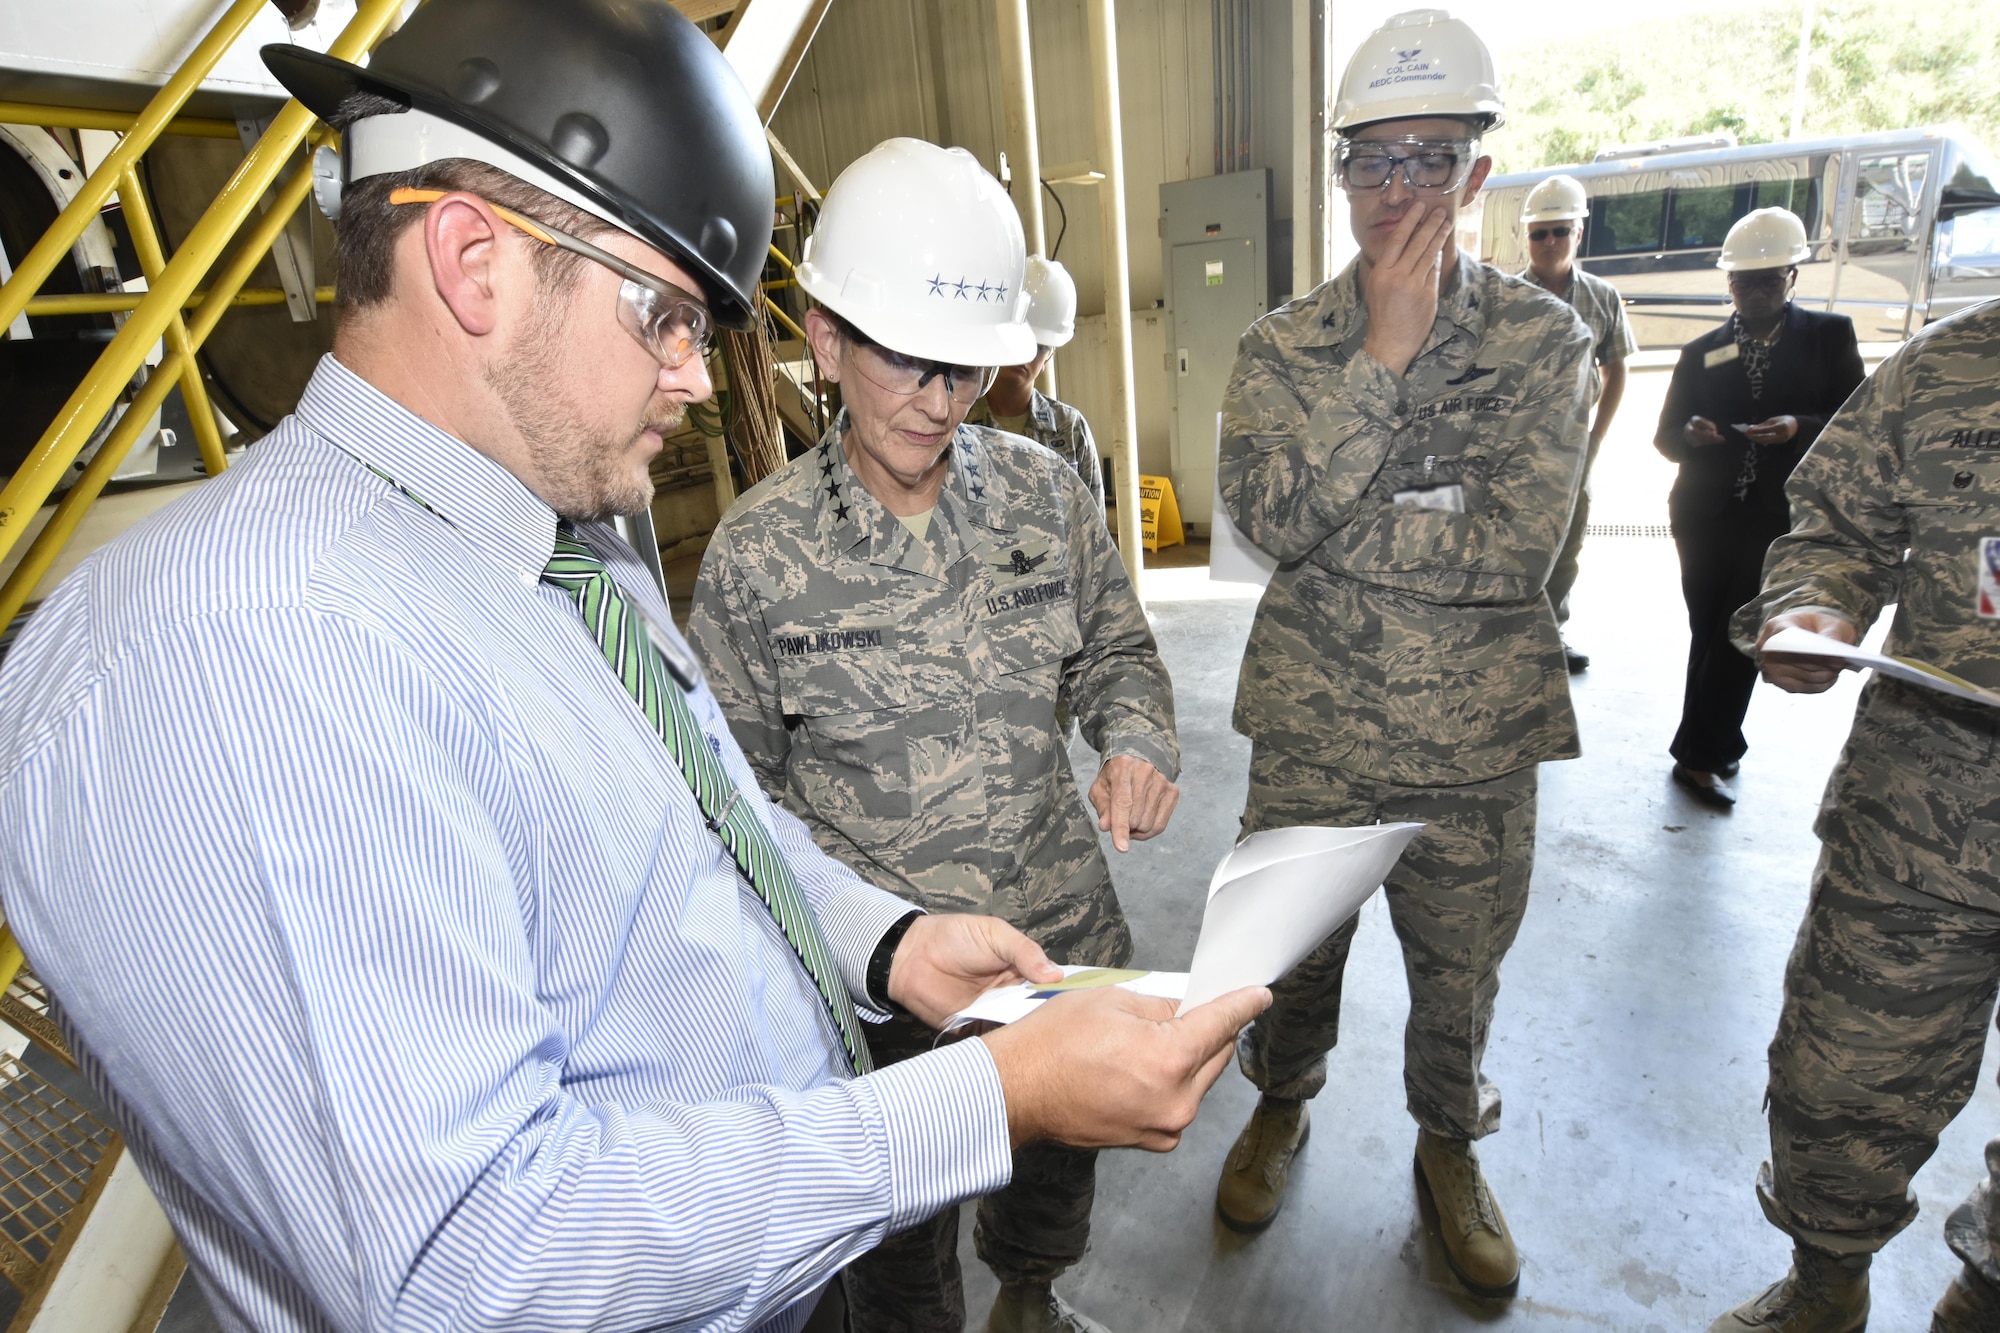 Jonathan Osborne, HTCI Project Manager and Technical Lead at Arnold Air Force Base (left) speaks with Gen. Ellen M. Pawlikowski, Air Force Materiel Command commander (center) and Col. Scott Cain, AEDC commander (right), regarding the transformation of the AEDC J-5 test facility into a facility that will support future hypersonic system weapon acquisition and research and development programs. (U.S. Air Force photo/Rick Goodfriend)